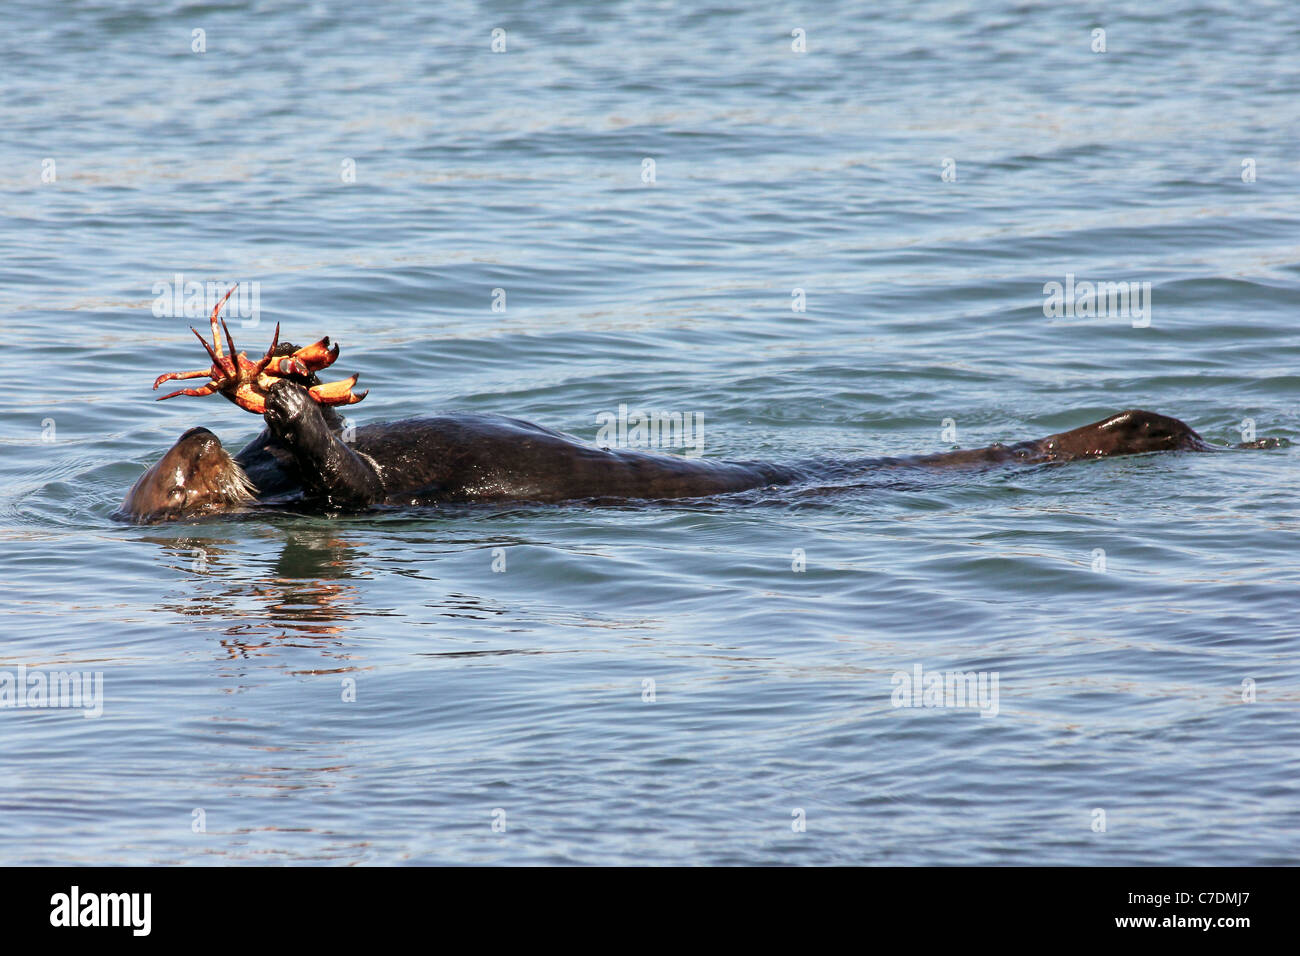 An Endangered Sea Otter (Enhydra lutris nereis) Eats a Crab in the Waters of California Stock Photo